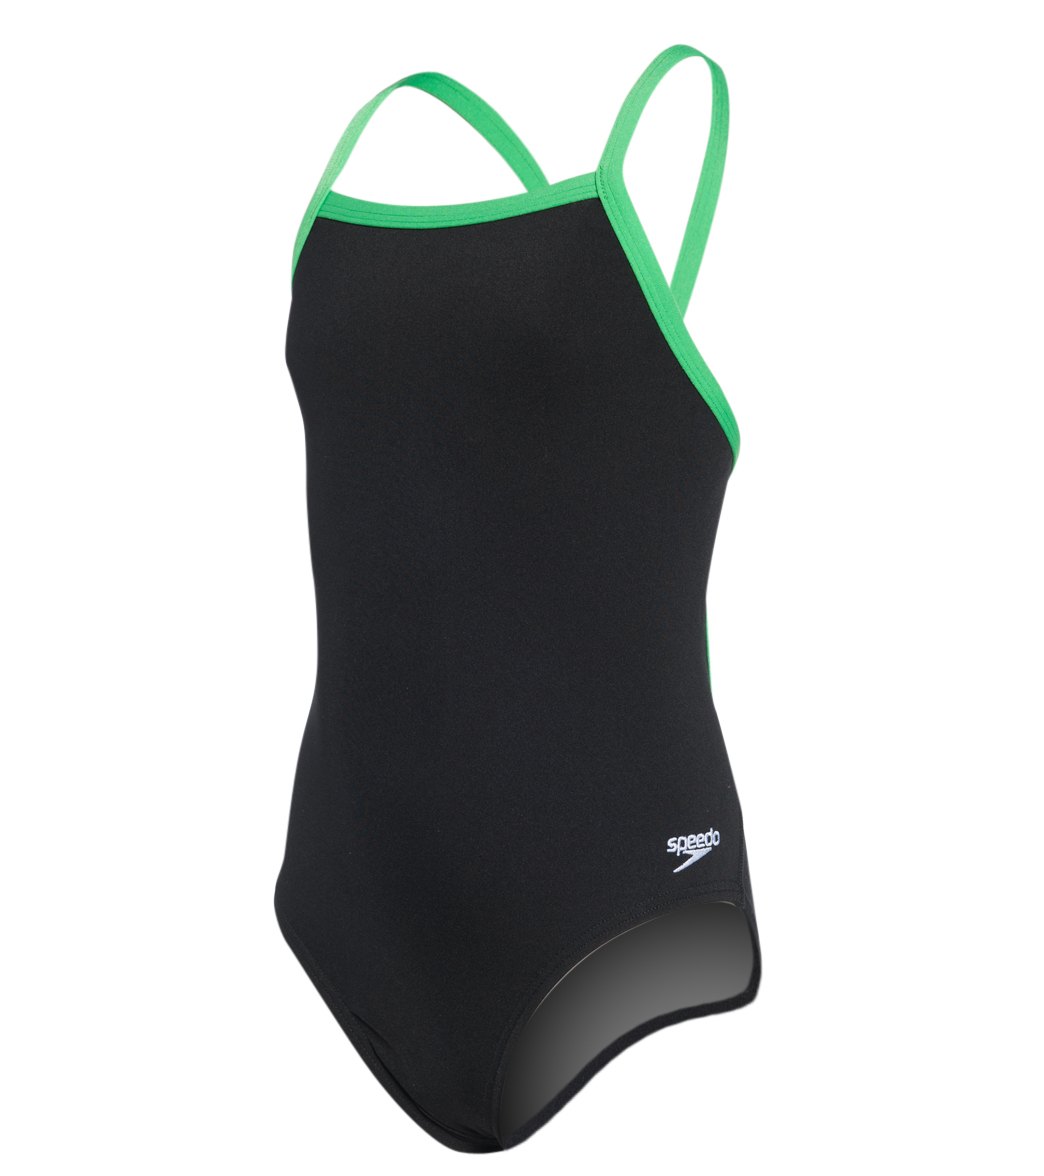 Speedo Girls' Solid Endurance + Flyback Training One Piece Swimsuit - Black/Bright Green 22/6 Polyester/Pbt - Swimoutlet.com